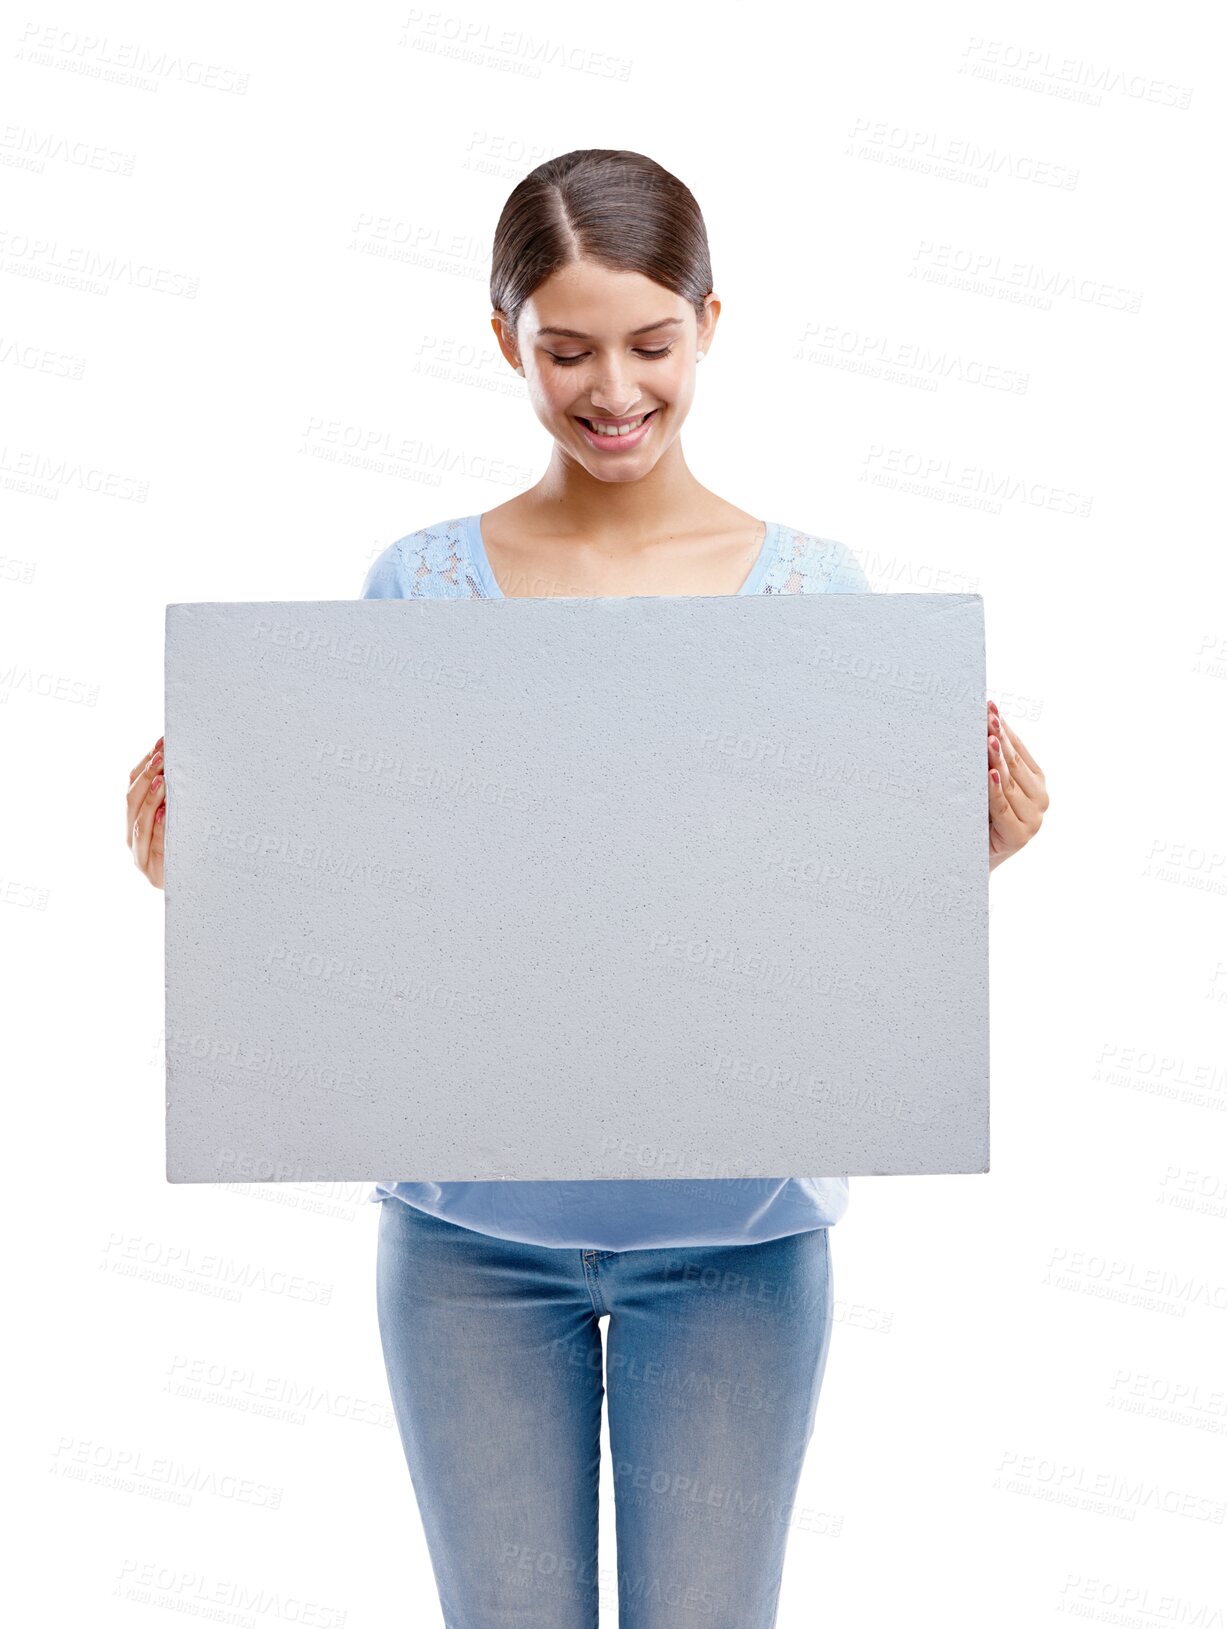 Buy stock photo Woman, looking and smile with board for mockup isolated on a transparent png background. Poster, copy space and happy person with branding for commercial, promotion or advertising and marketing.